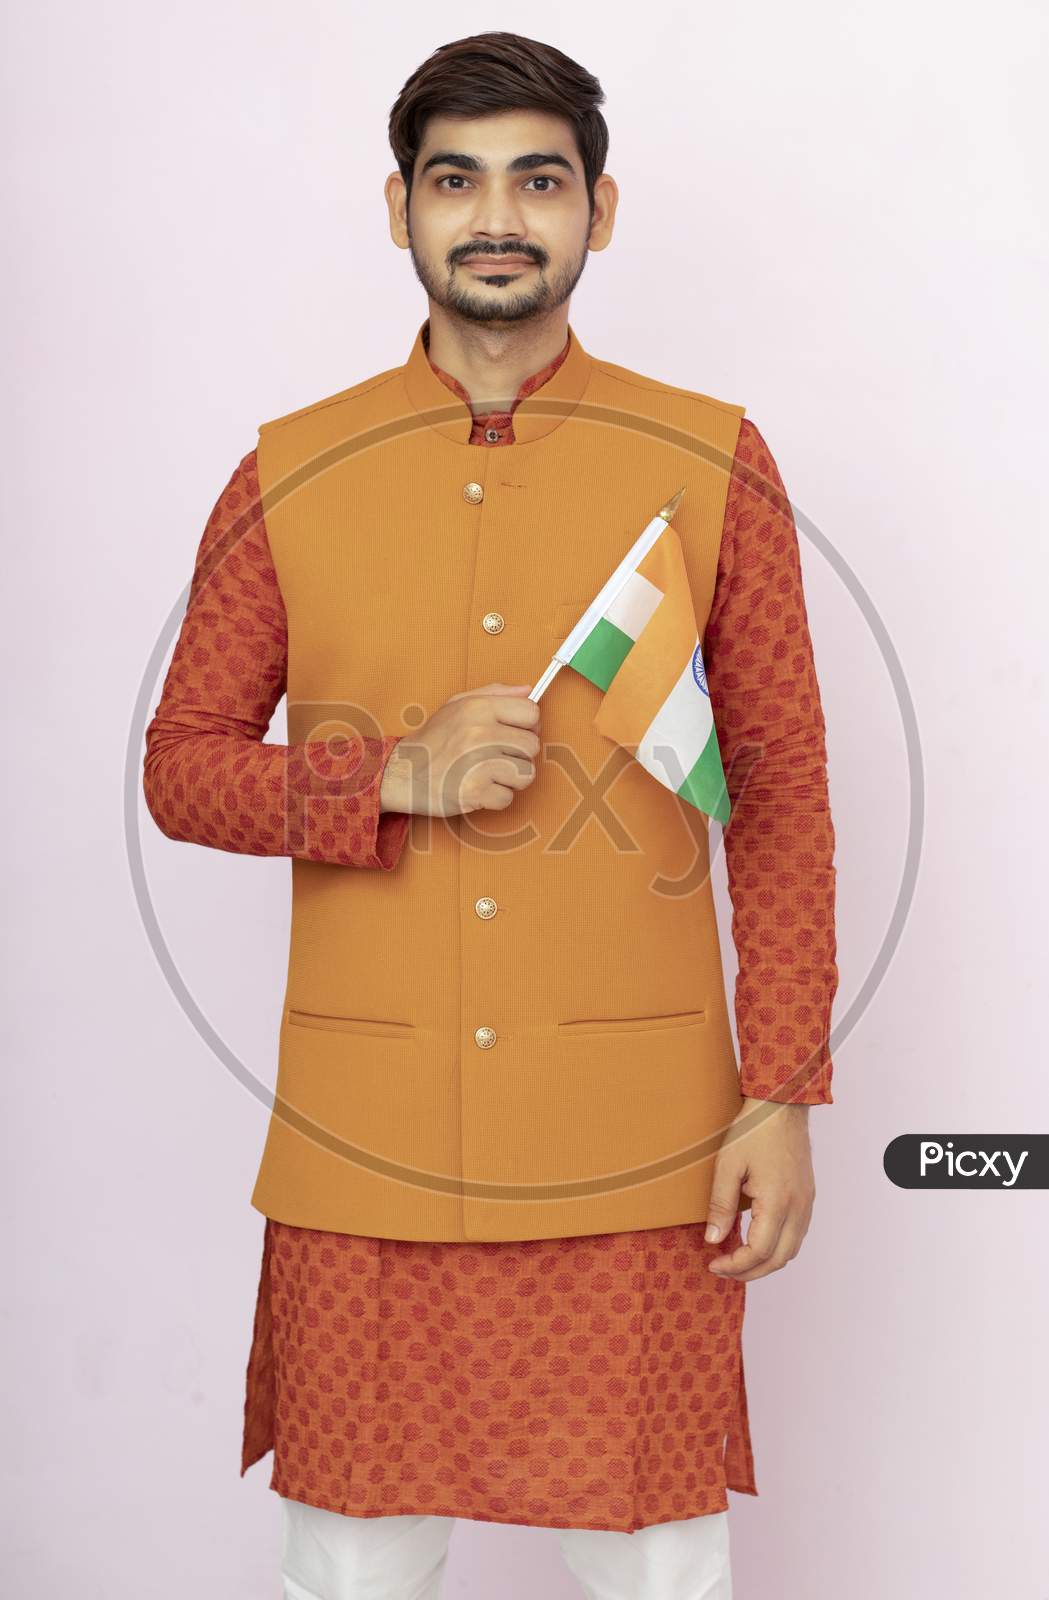 Indian Boy Or Man In Ethnic And Traditional Jacket Wear Holding Indian National Flag And Showing Patriotism, Standing Isolated Background.